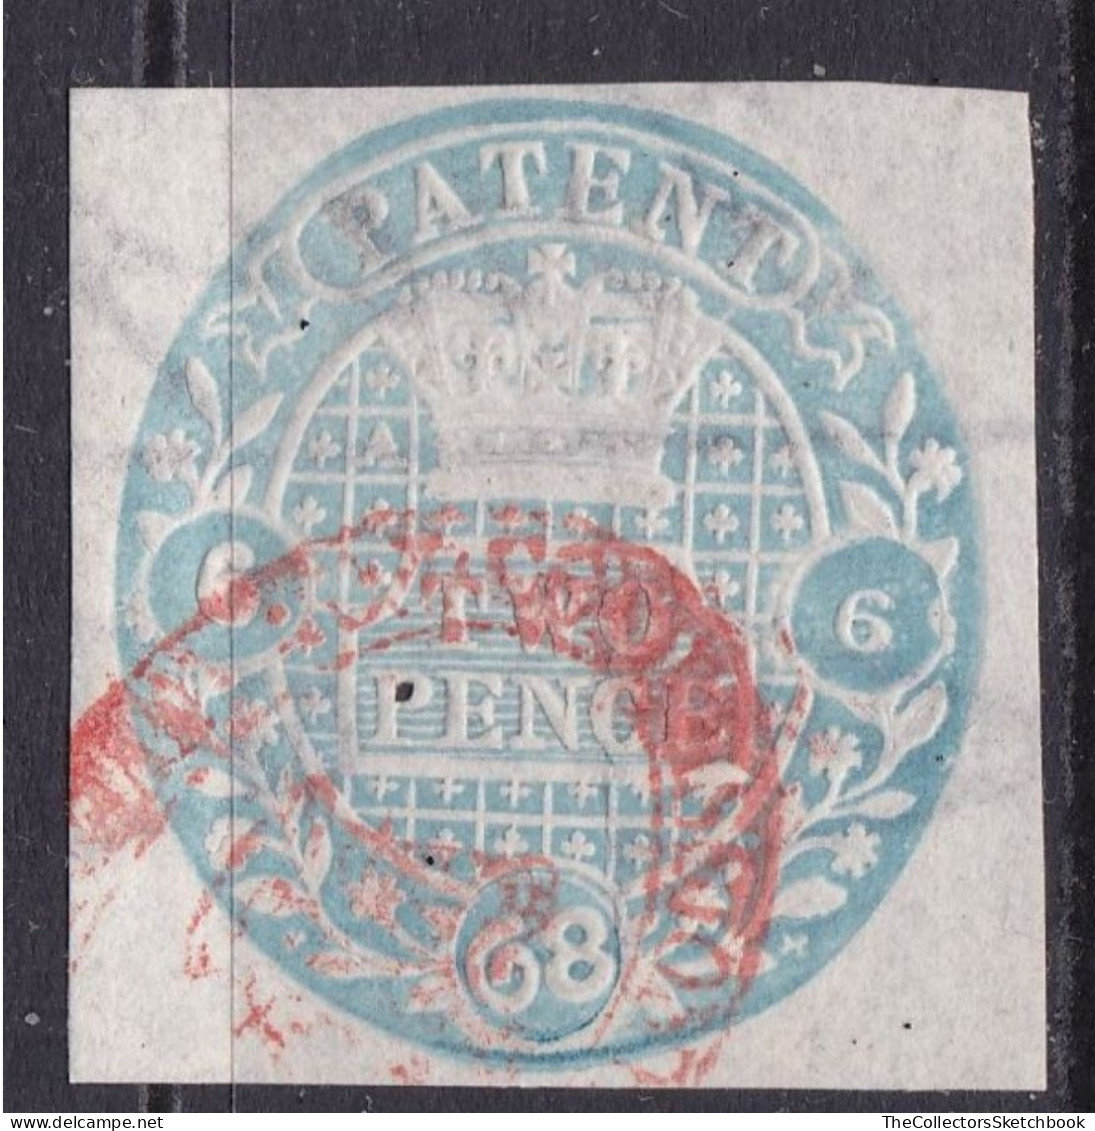 GB Fiscal/ Revenue Stamp.  Patent - 2d-  Blue Good Used - Revenue Stamps